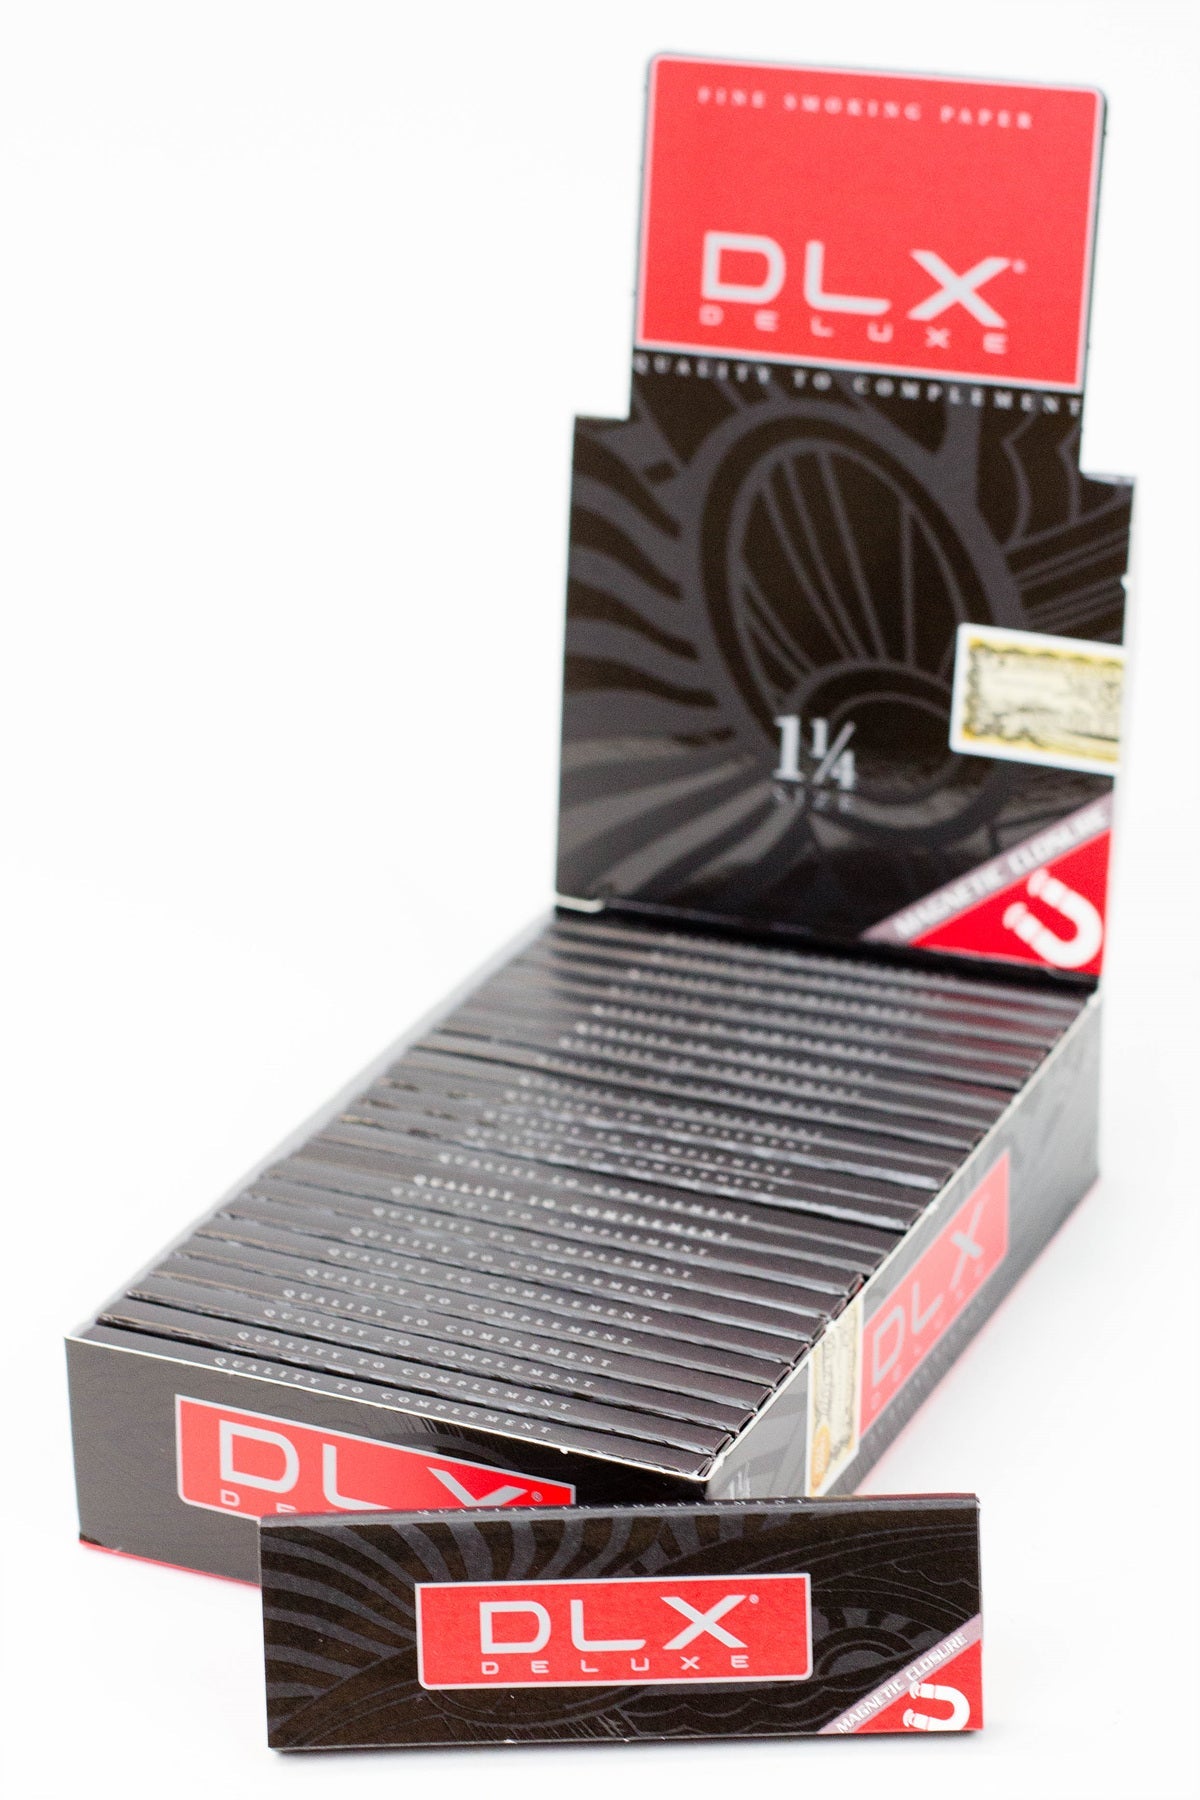 DLX deluxe Rolling Papers 1 1/4_0